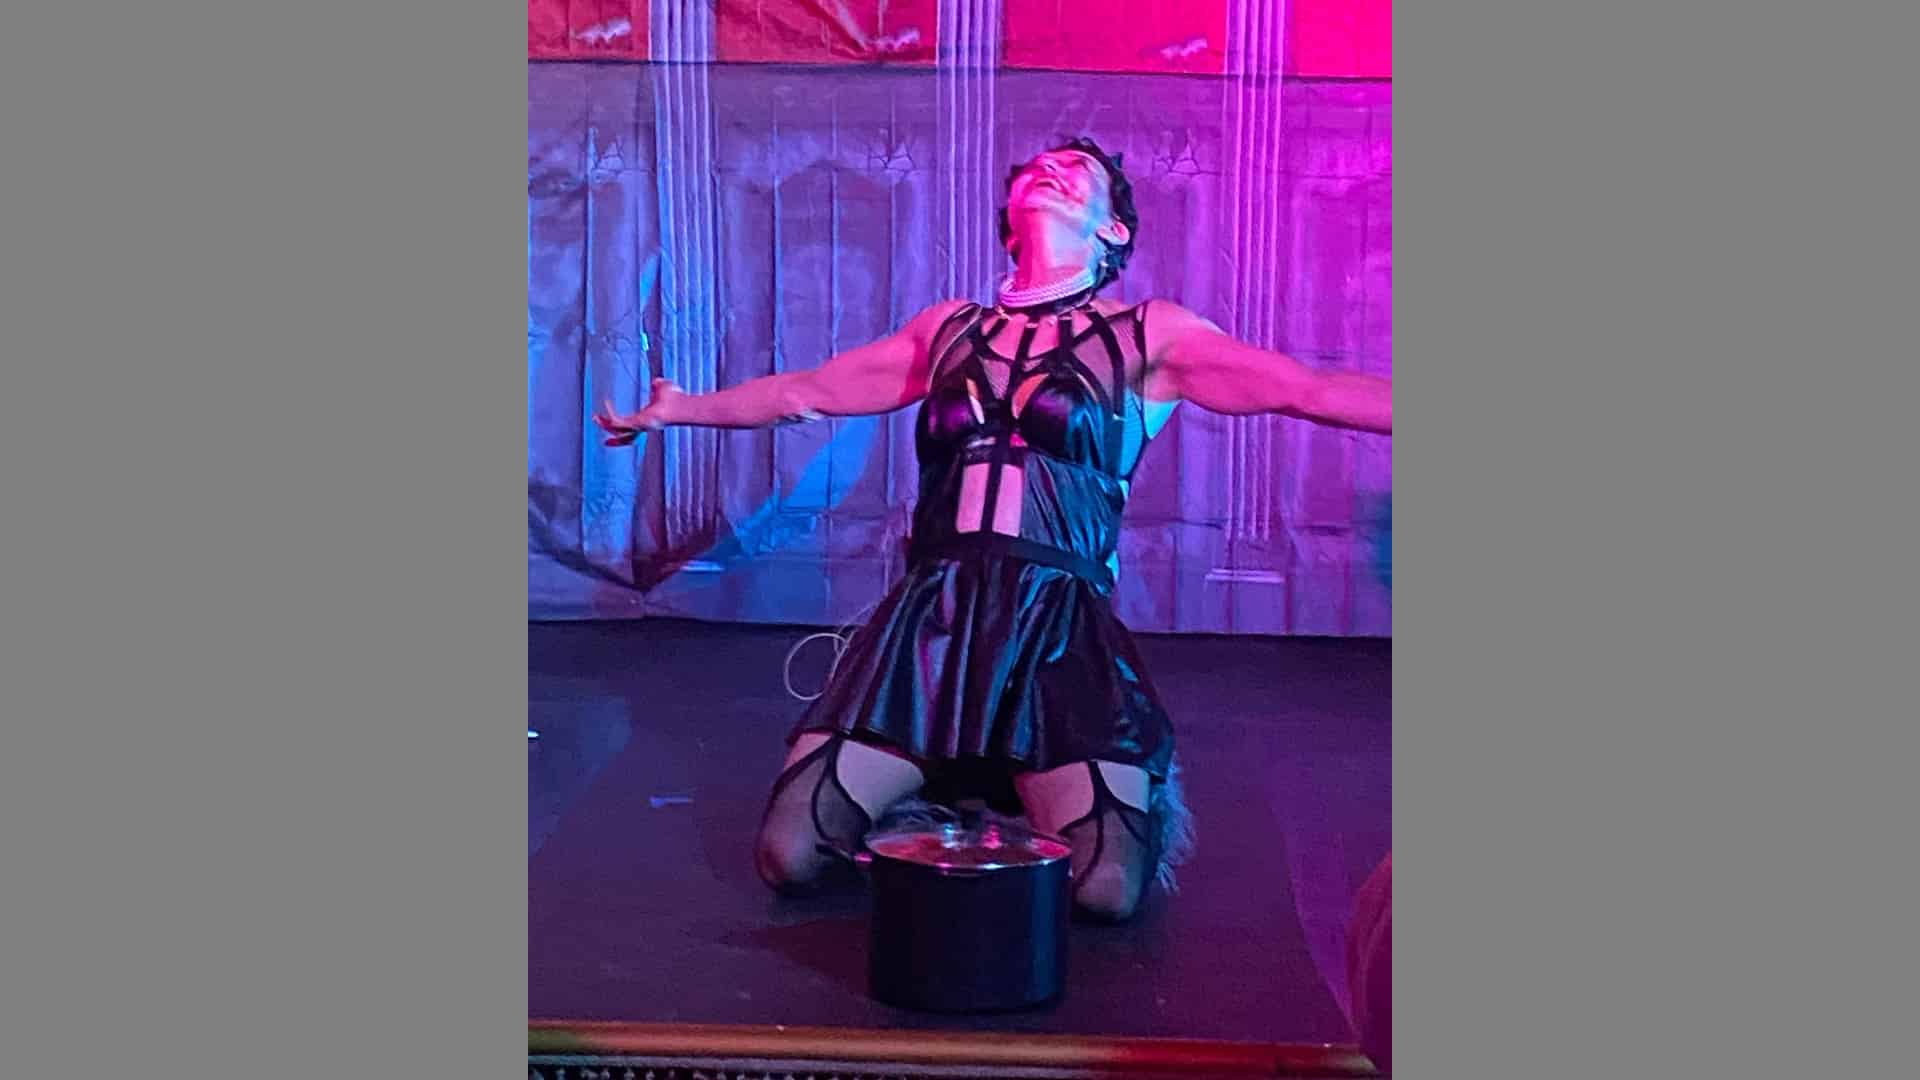 A performer kneels on the stage, wearing garters and a corset